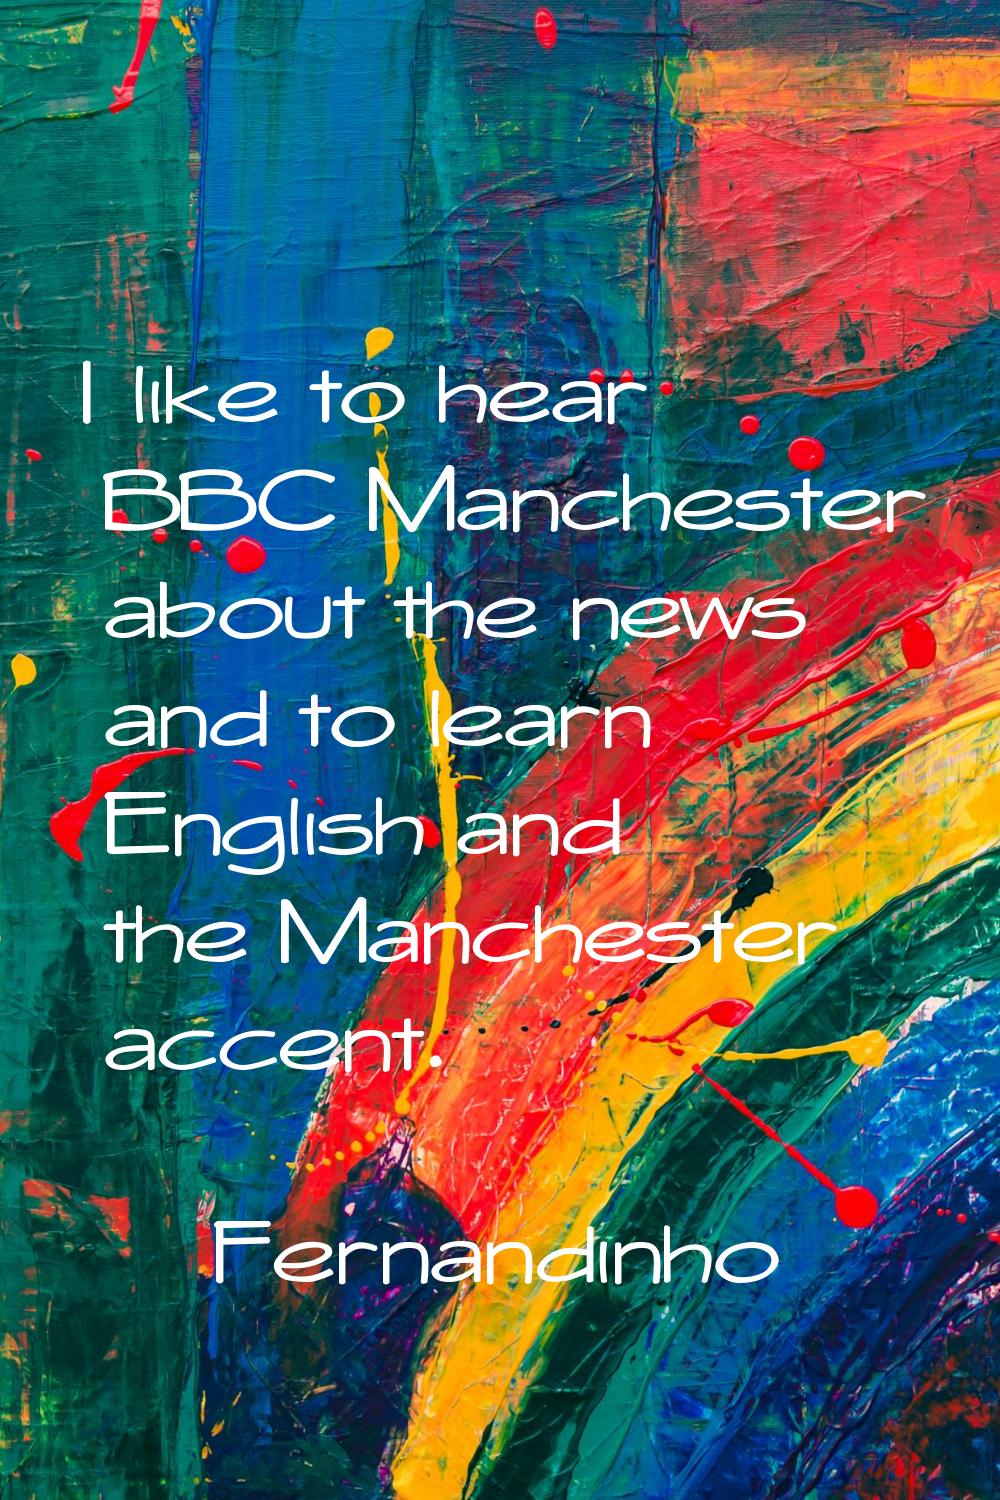 I like to hear BBC Manchester about the news and to learn English and the Manchester accent.